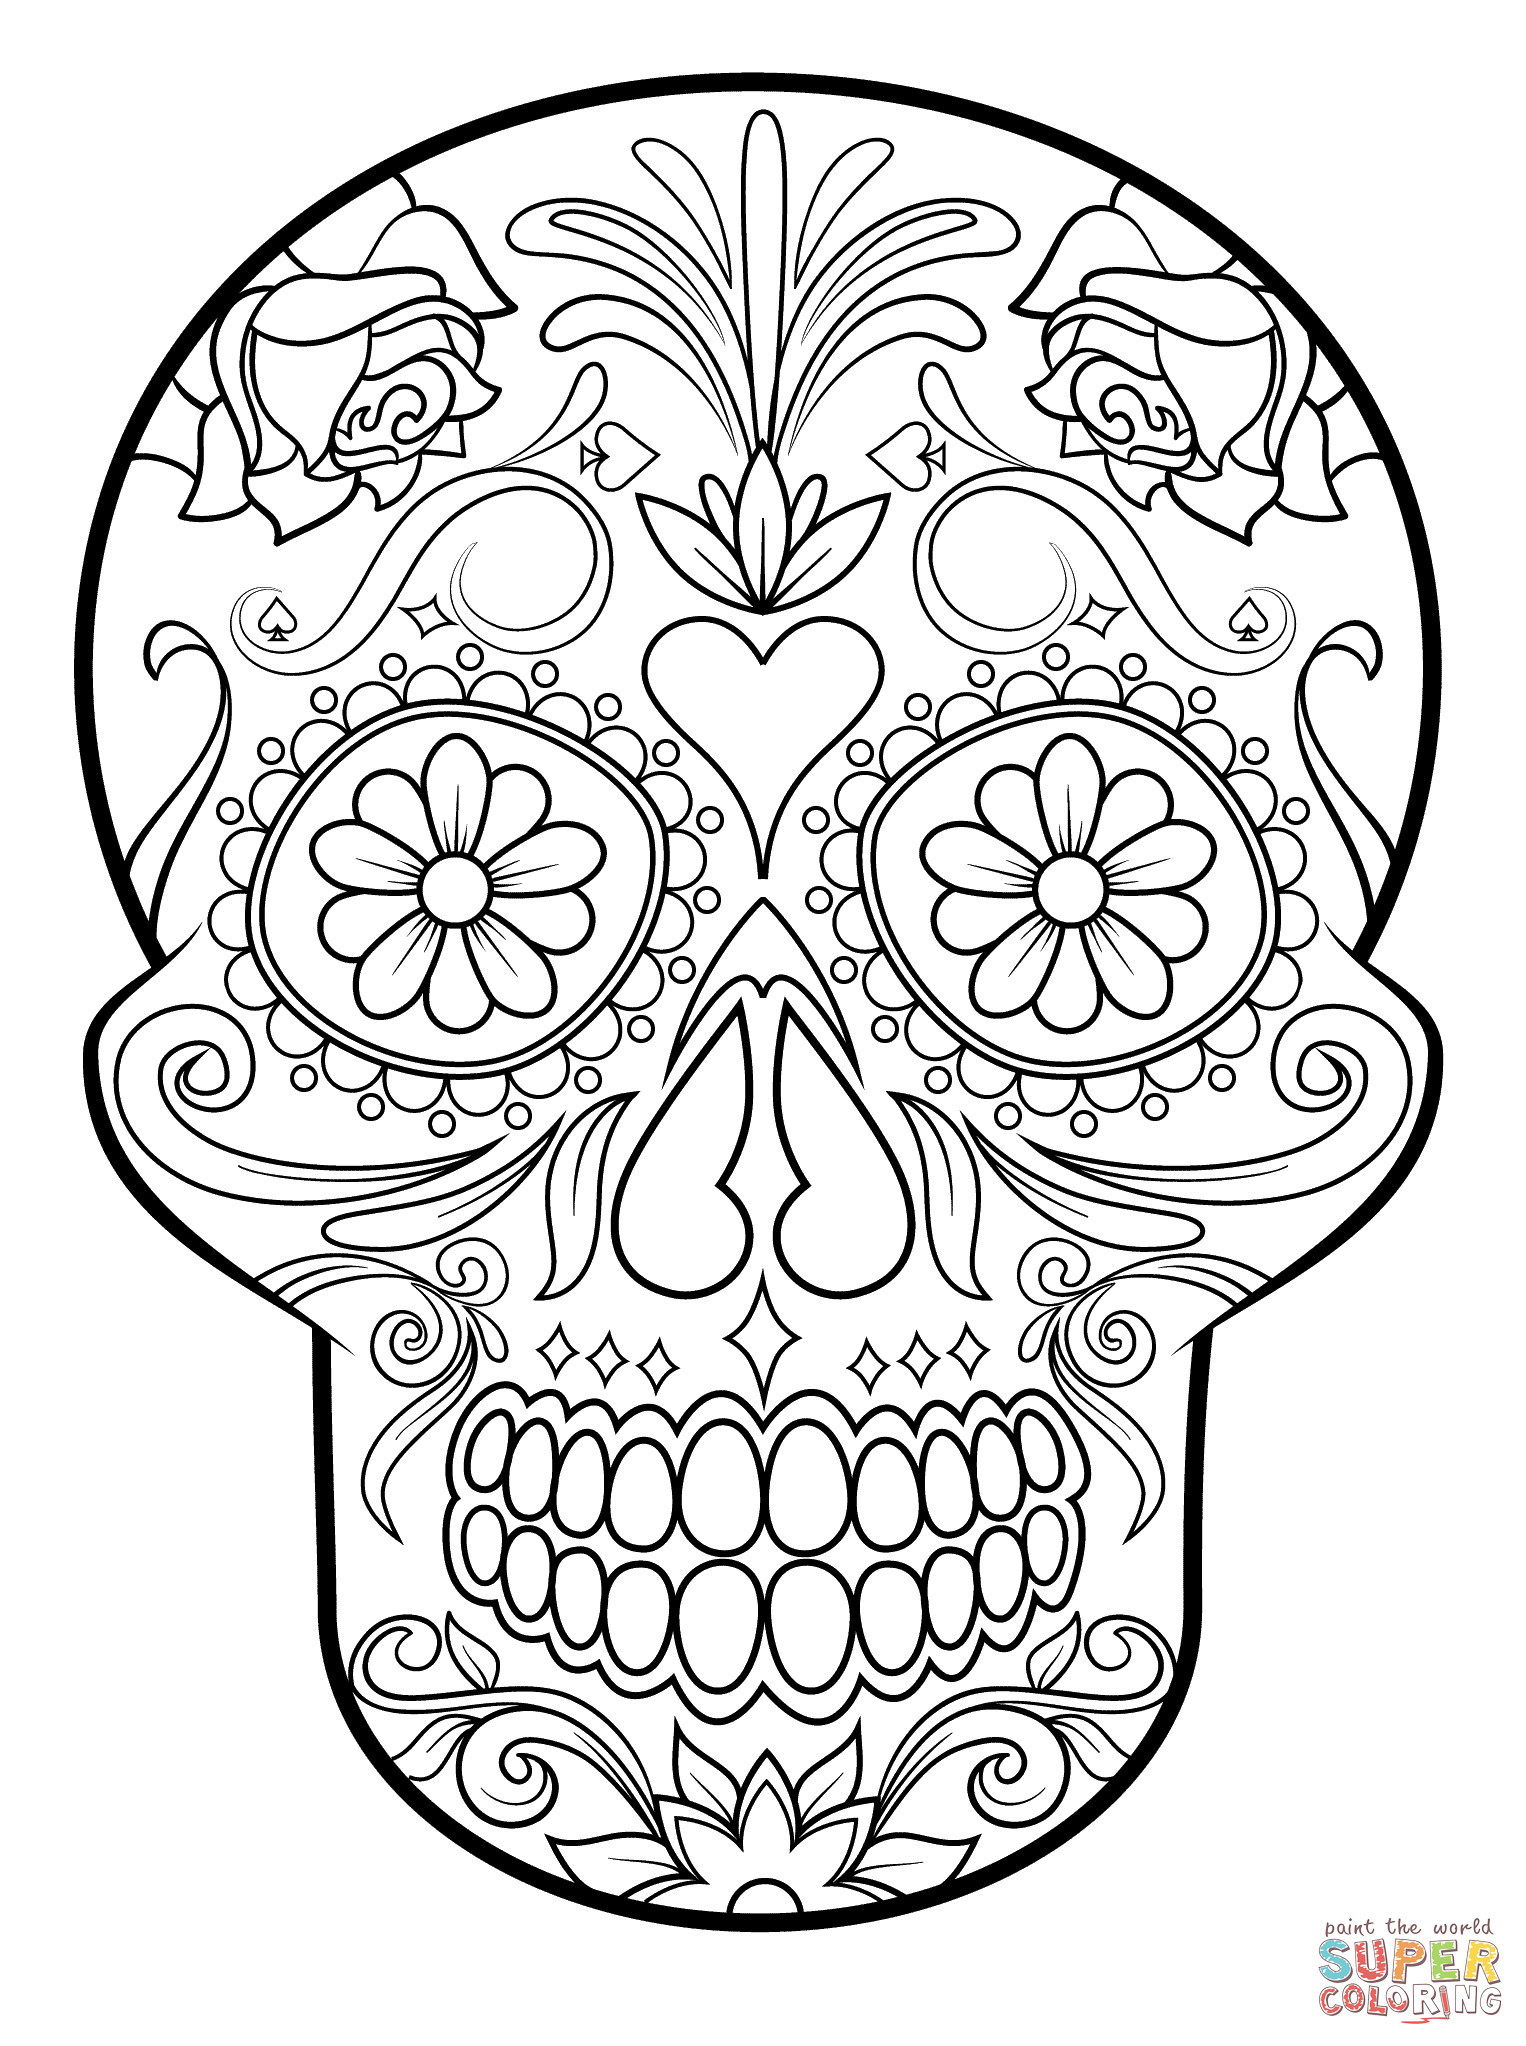 Cinco De Mayo Coloring Pages Printable at GetDrawings | Free download